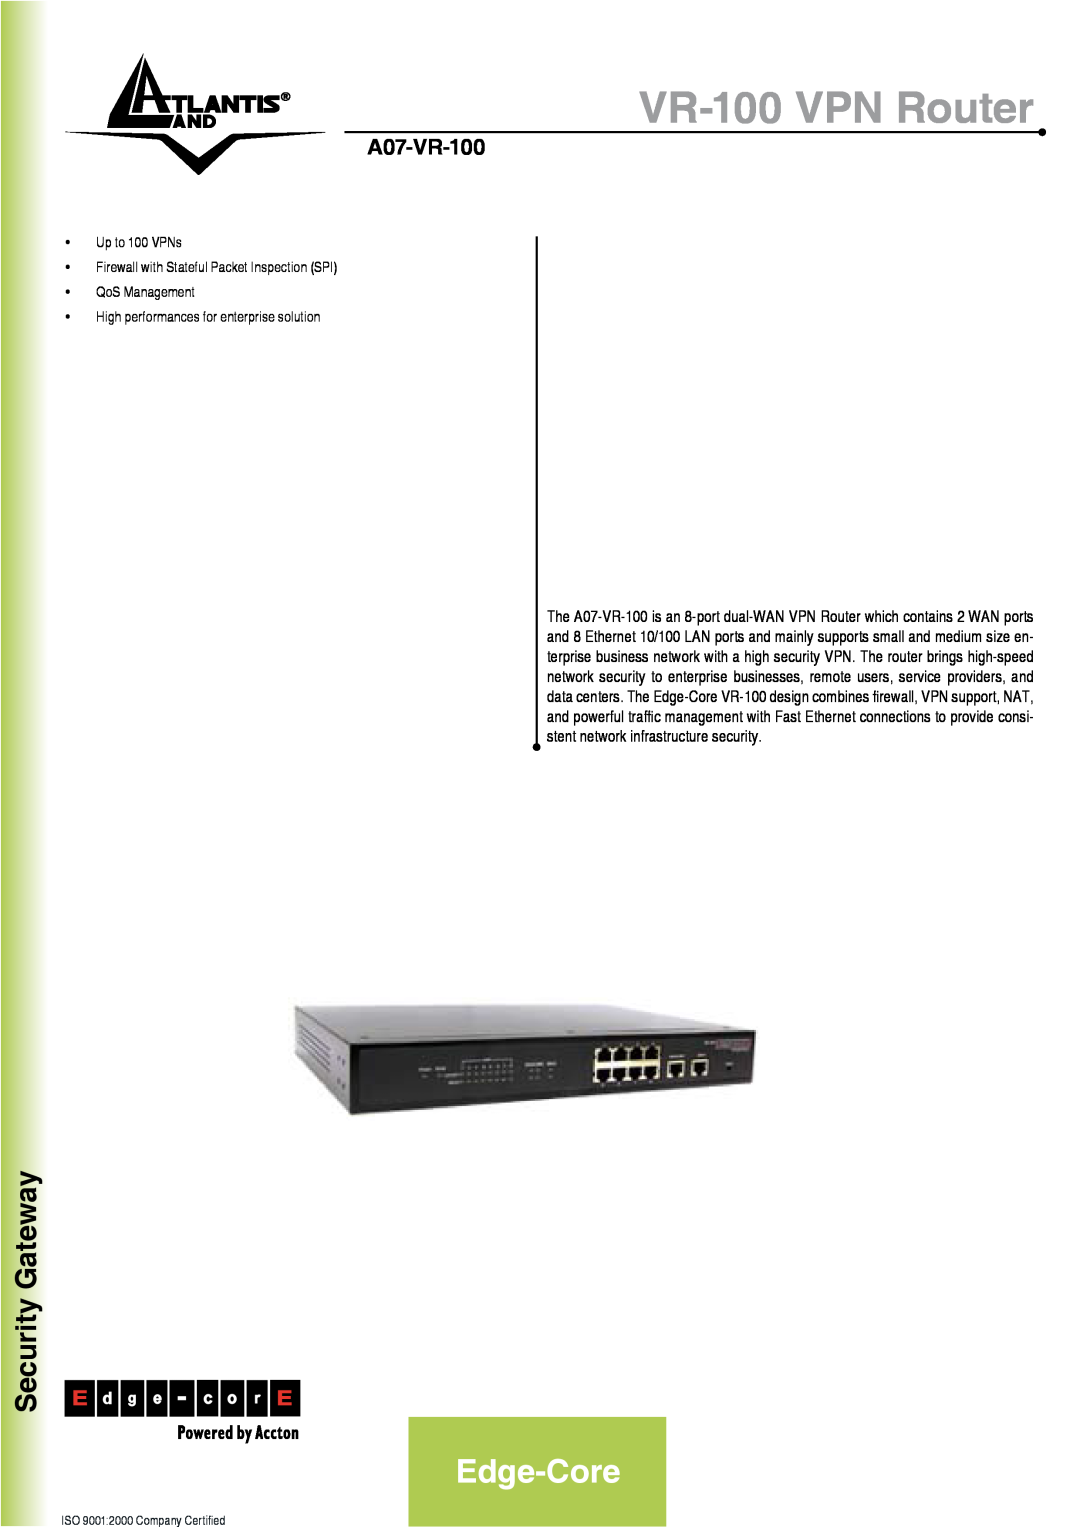 Atlantis Land A07-VR-100 user service VR-100 VPN Router, Edge-Core, Security Gateway, ISO 90012000 Company Certified 